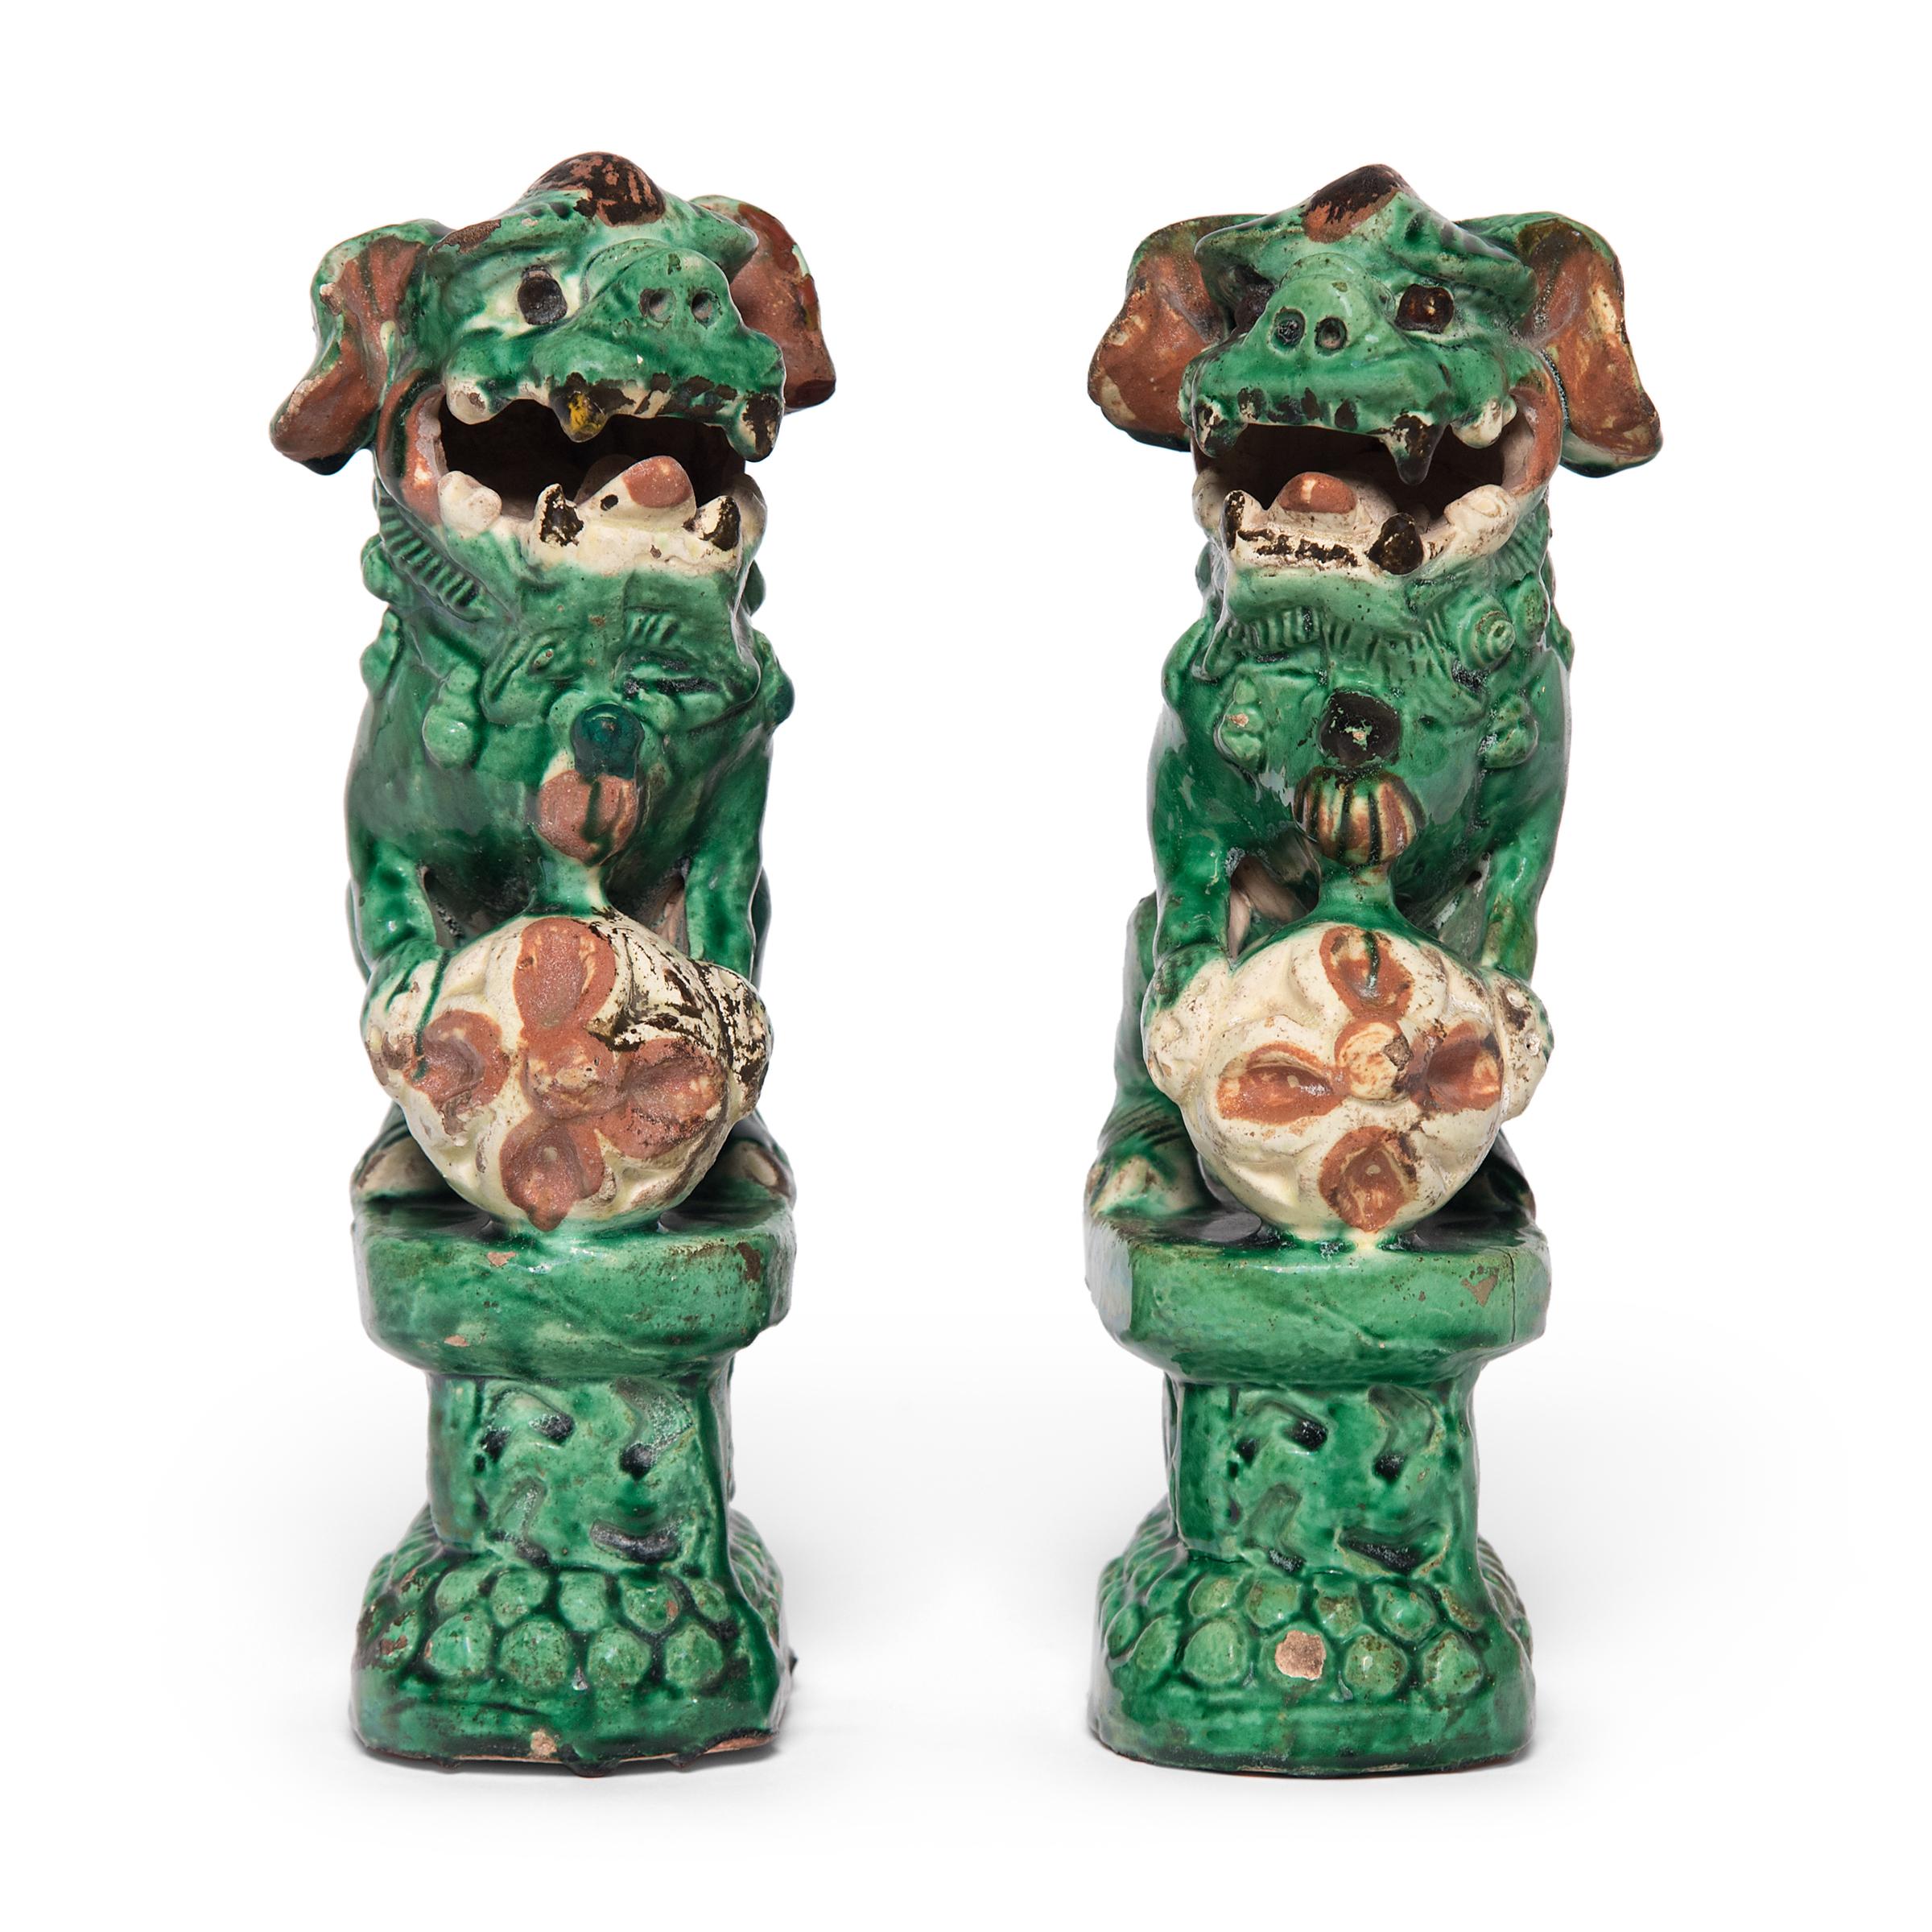 Although these fu dogs may look wicked - with their fearsome expressions and piercing gaze - they're actually benevolent guardians of the home. Also known as shizi, pair of fu dog lions are traditionally placed at the thresholds of sacred spaces,